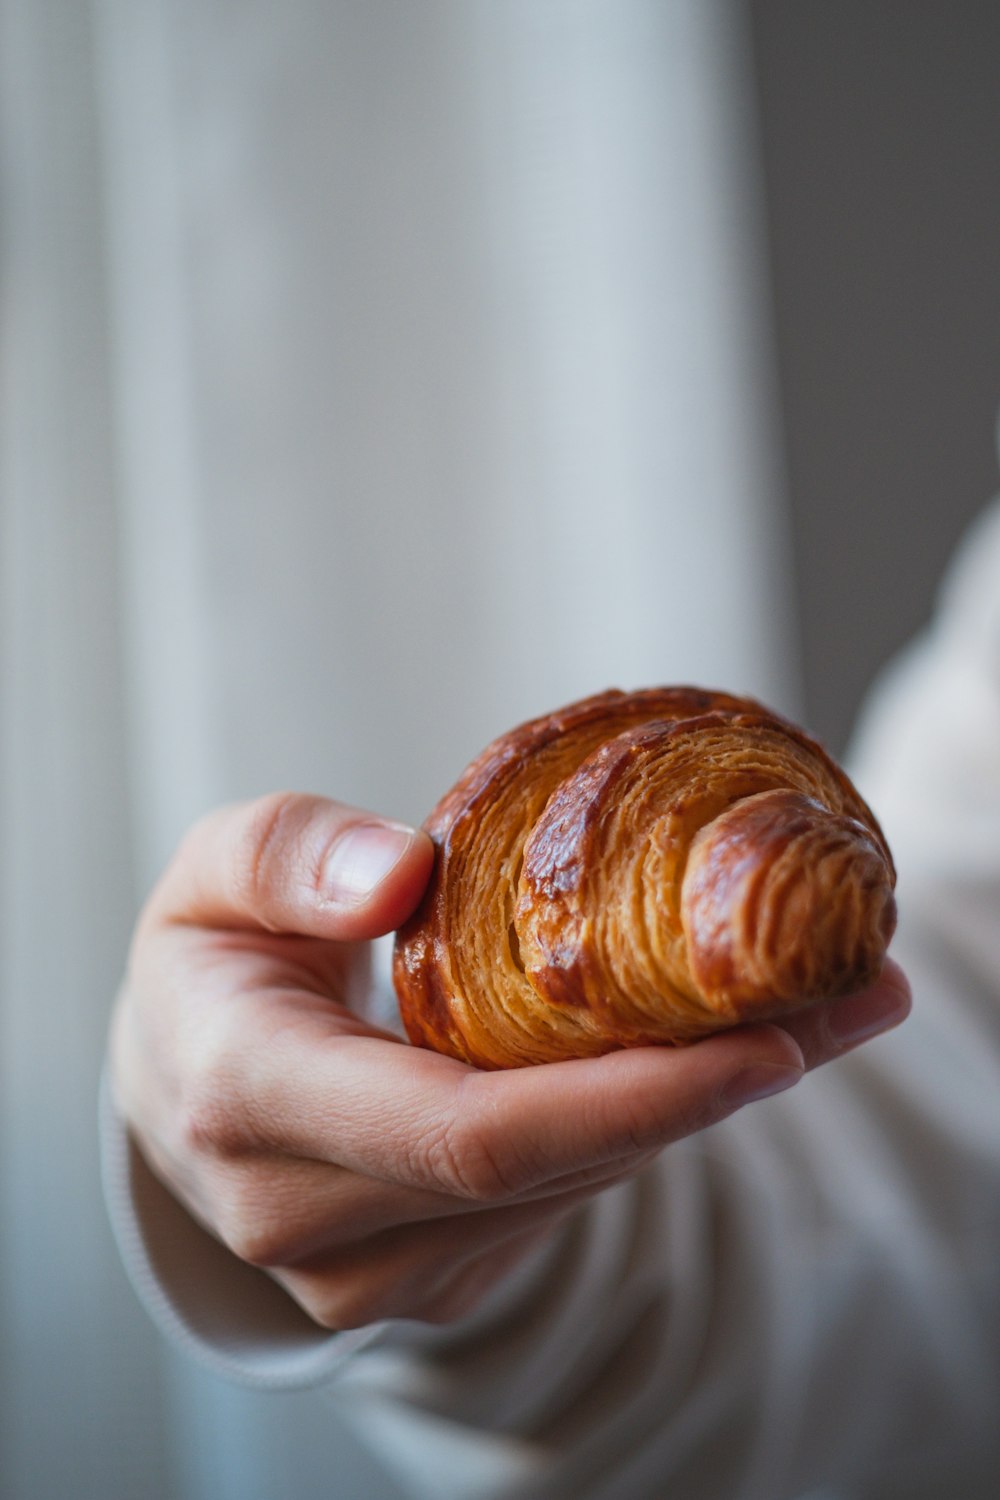 a person holding a croissant in their hand